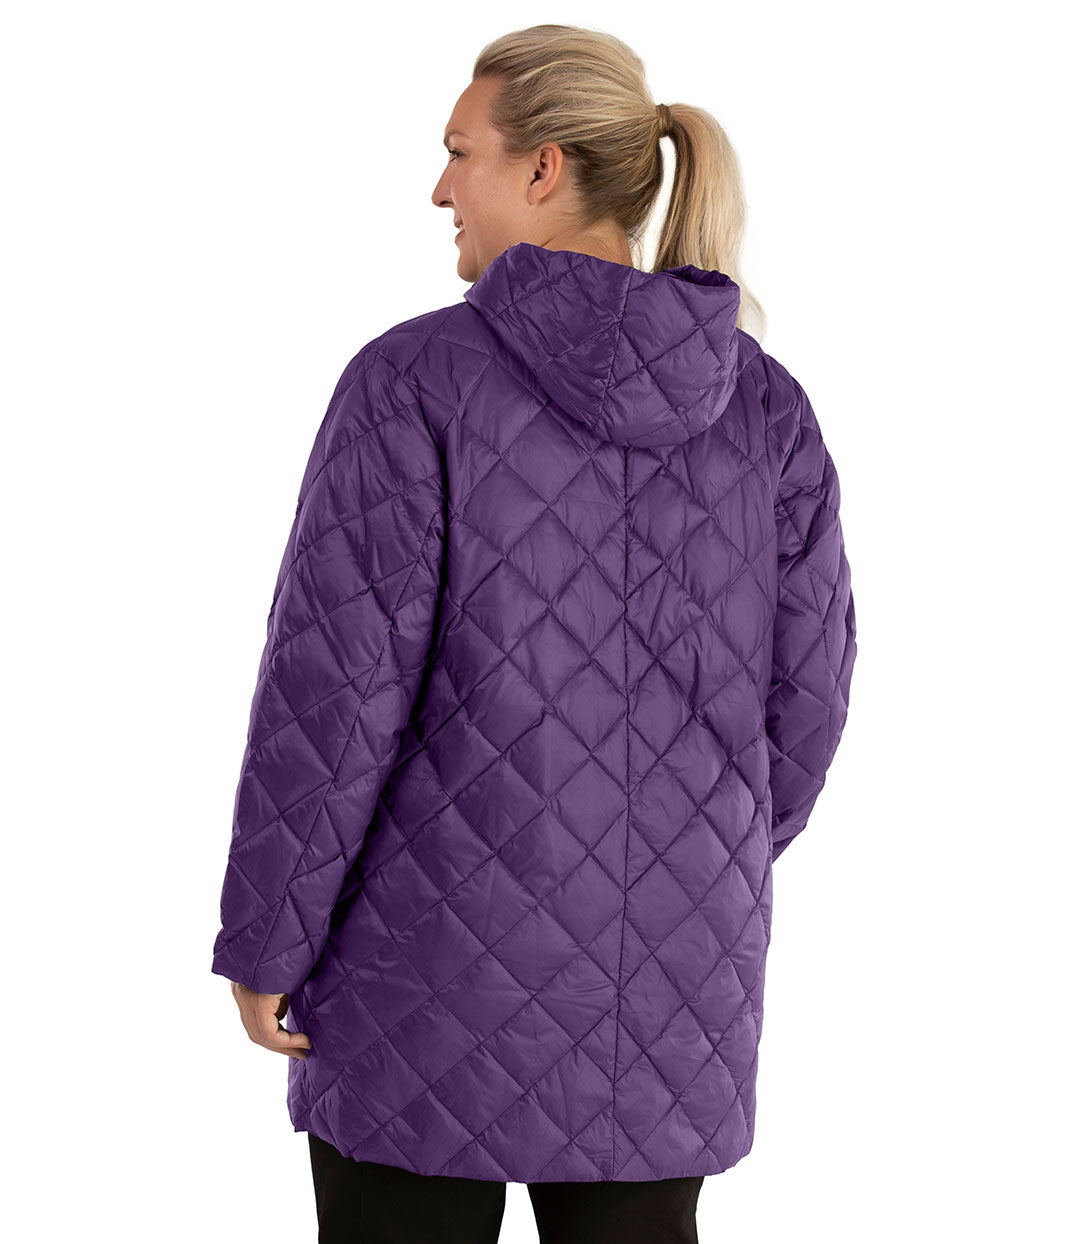 Plus size woman, back view , wearing a JunoActive plus size Quilted Light Weight Parka in Amethyst Purple. The jacket has a hood, snap front closure, and side zip pockets. Jacket quilting is a diamond pattern. The length of the plus size jacket hits below the hips.